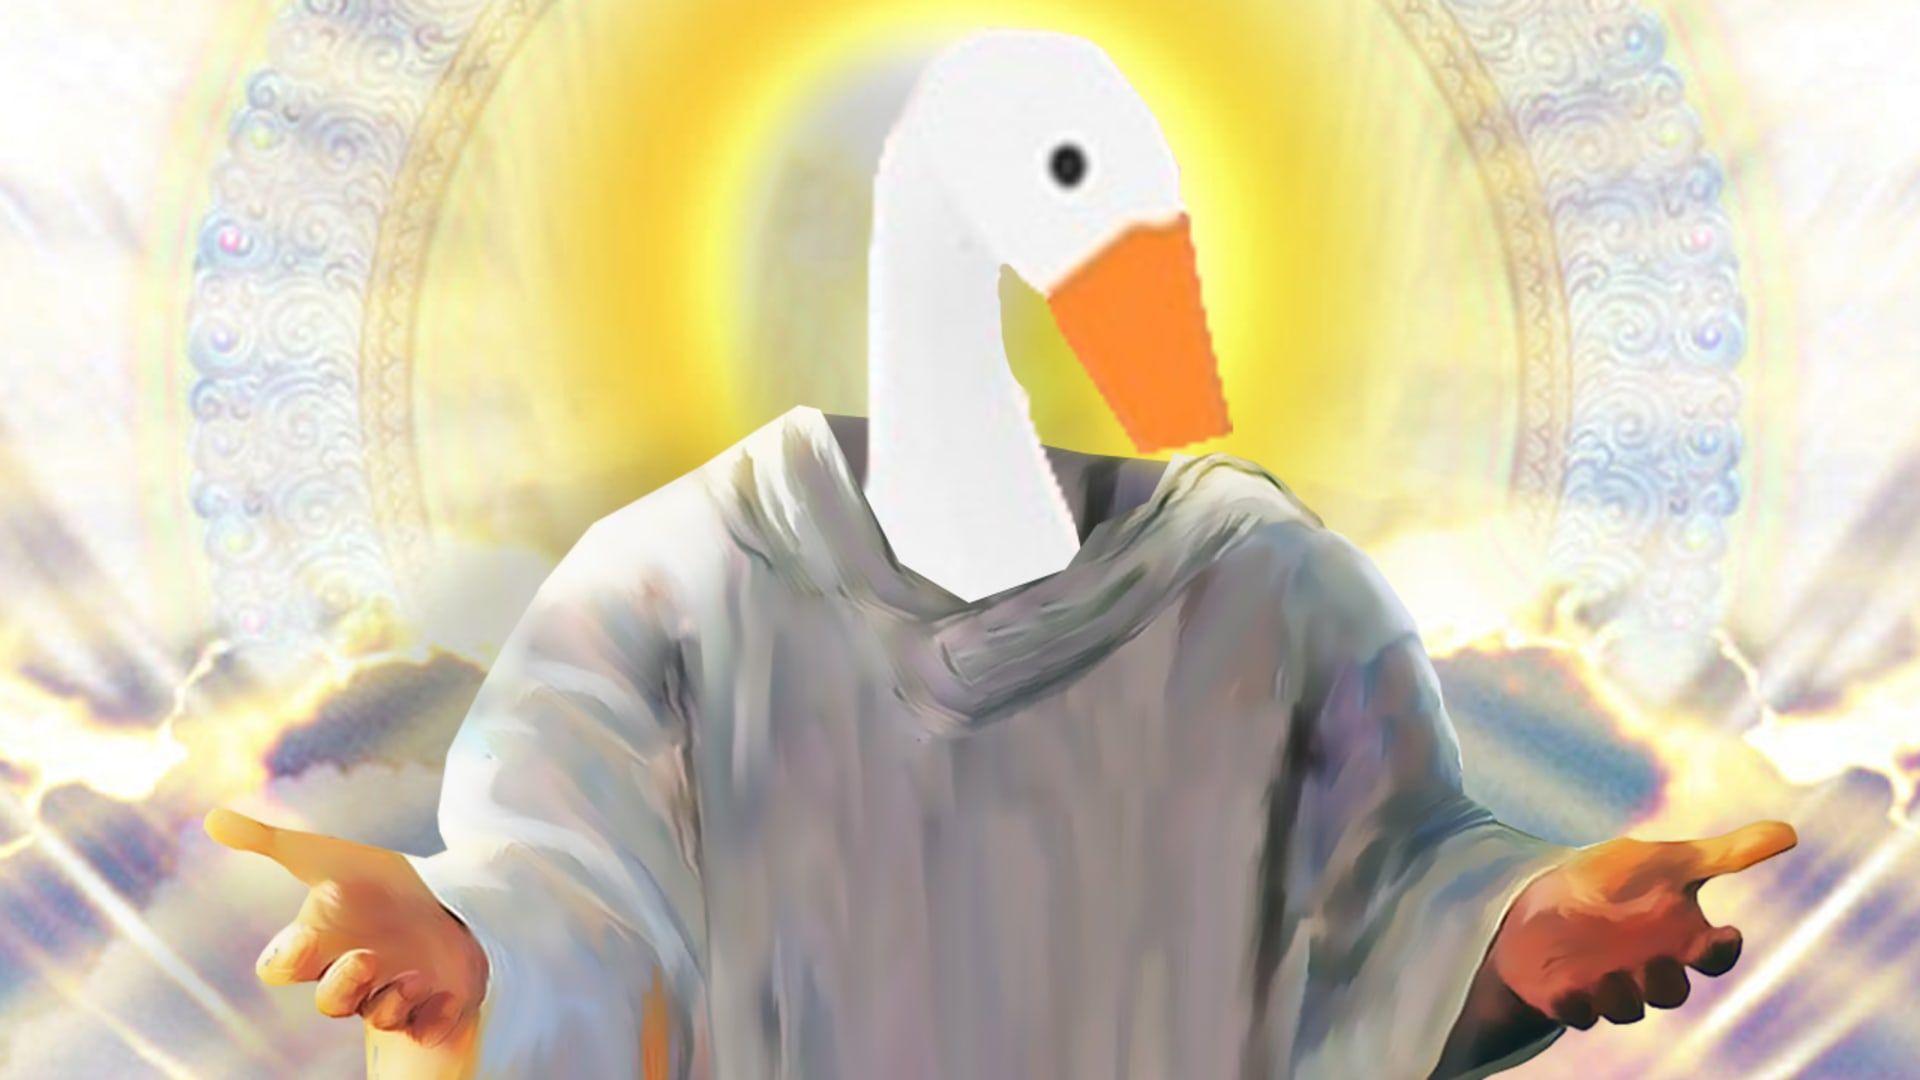 goose from untitled goose game